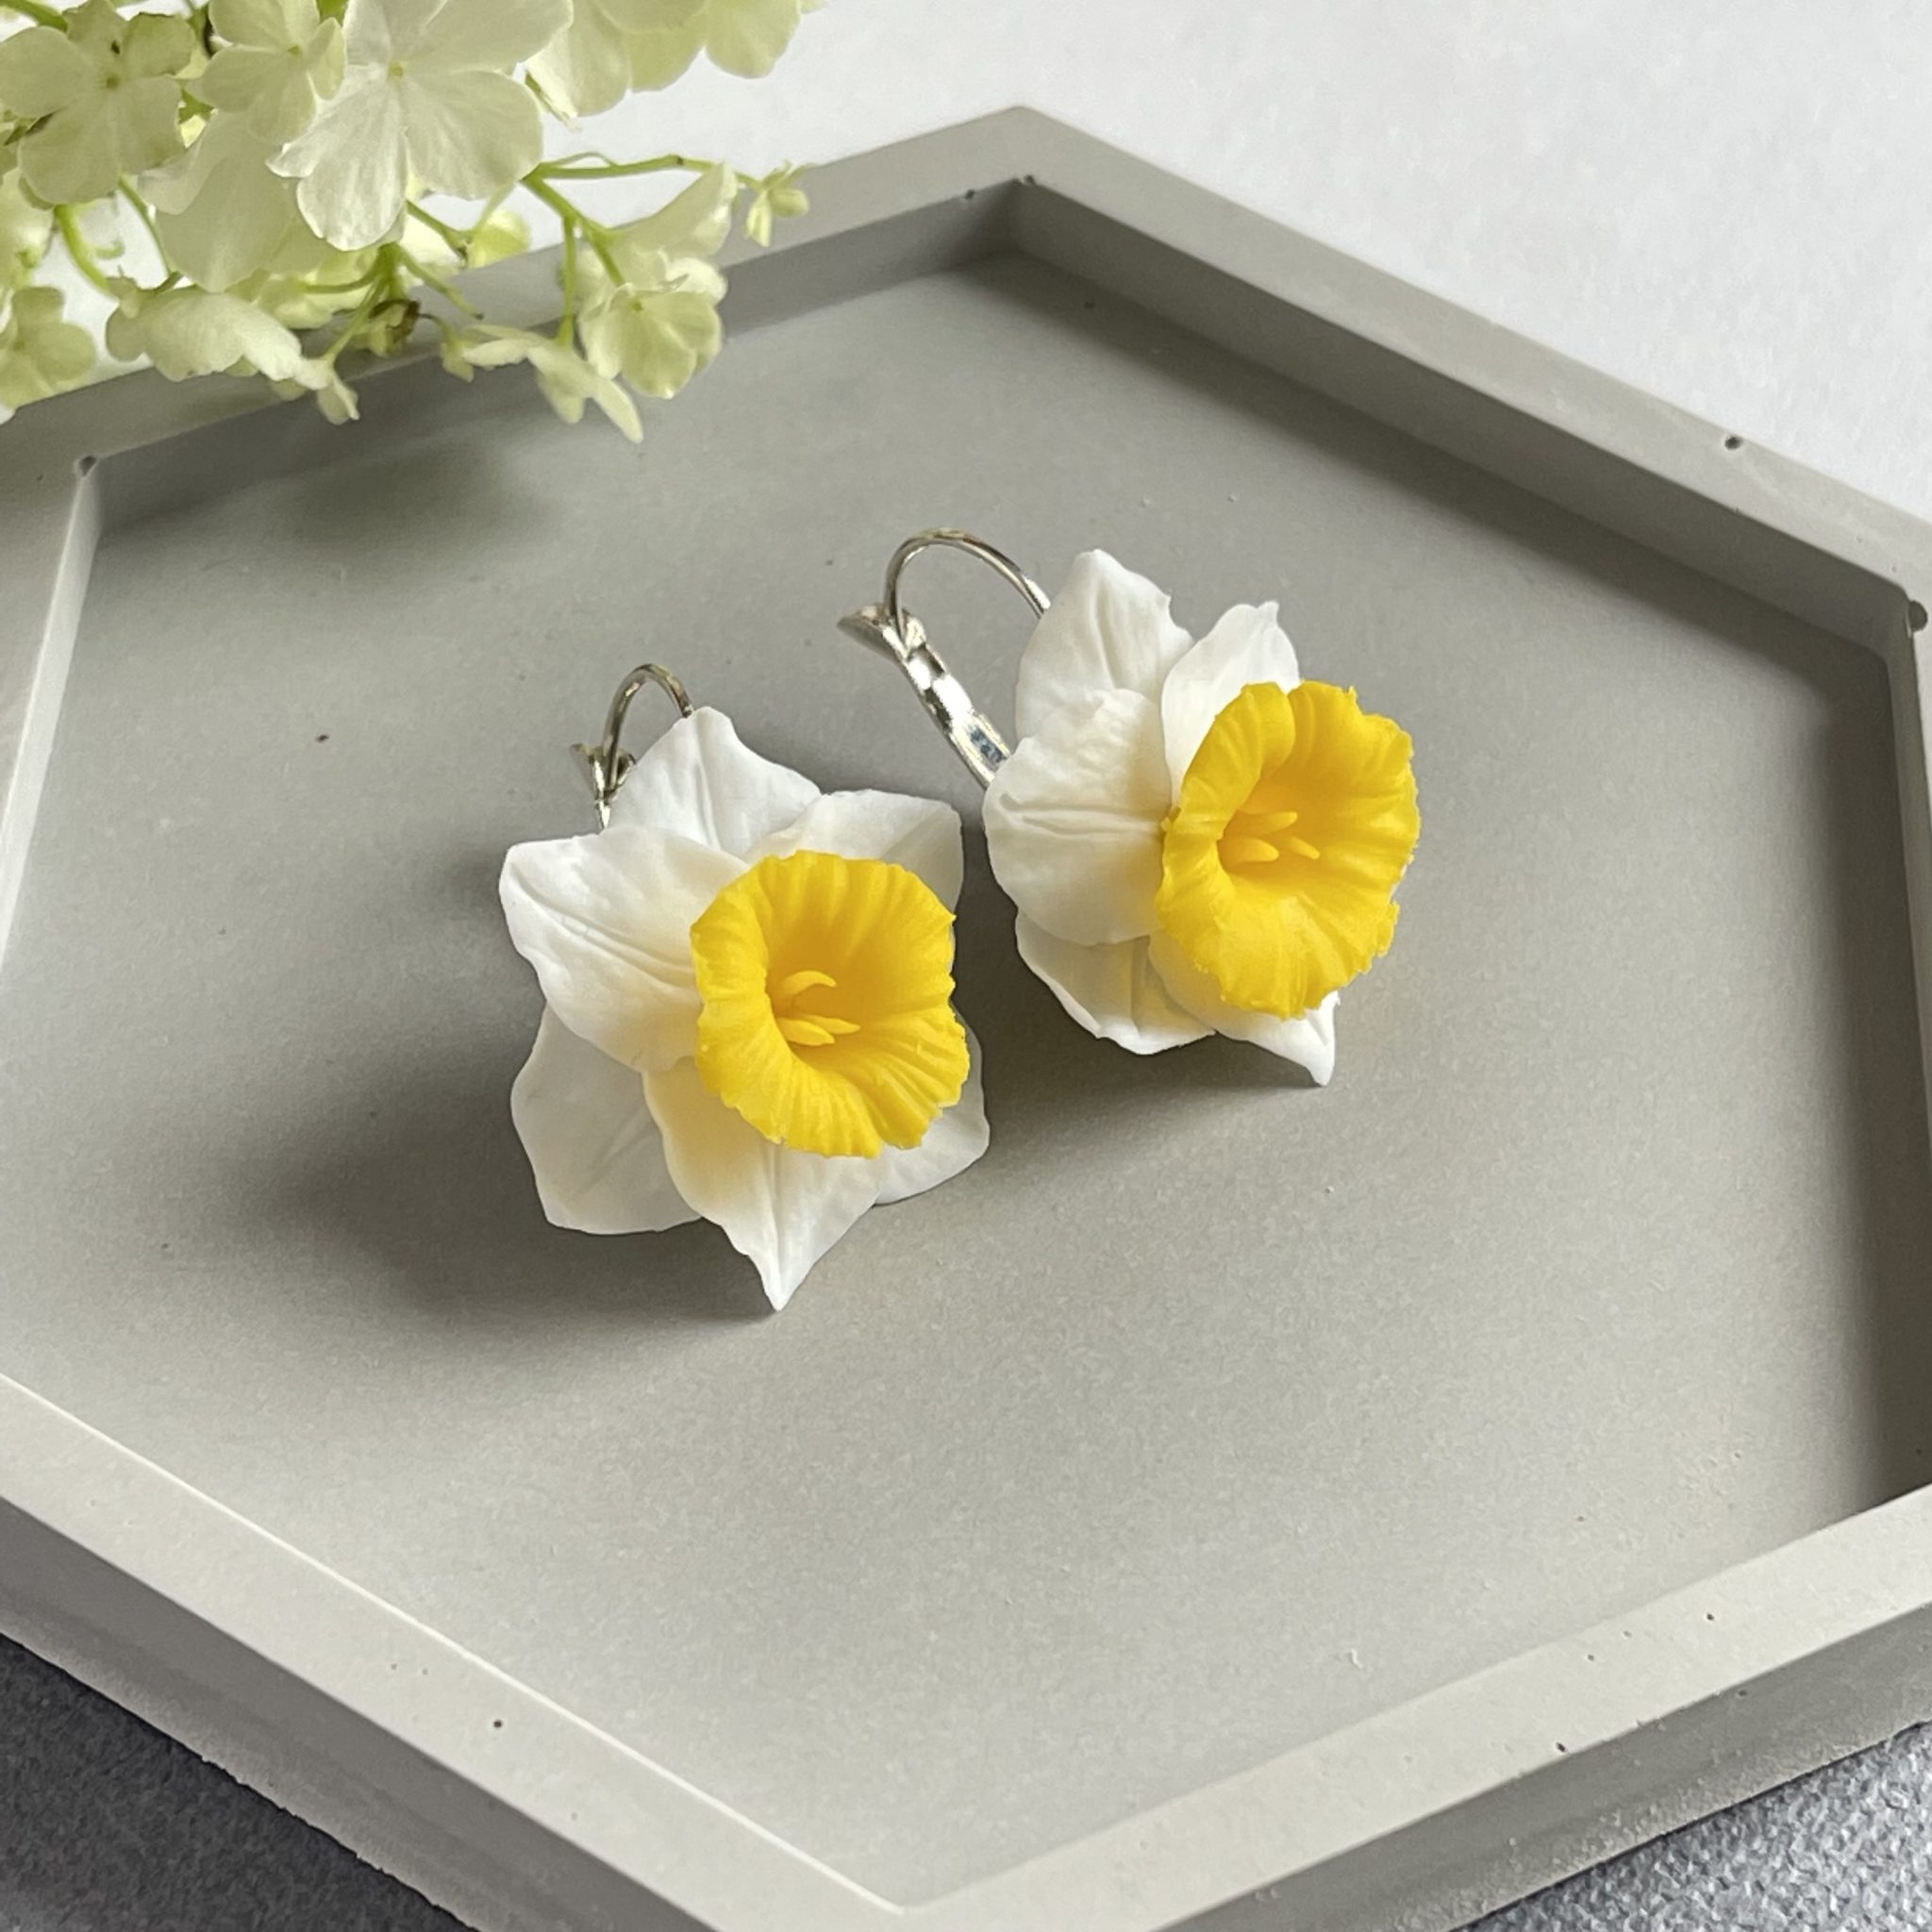 Daffodil earrings - White March Flower Narcissus, exquisite handmade polymer clay earrings for mom, earrings for her